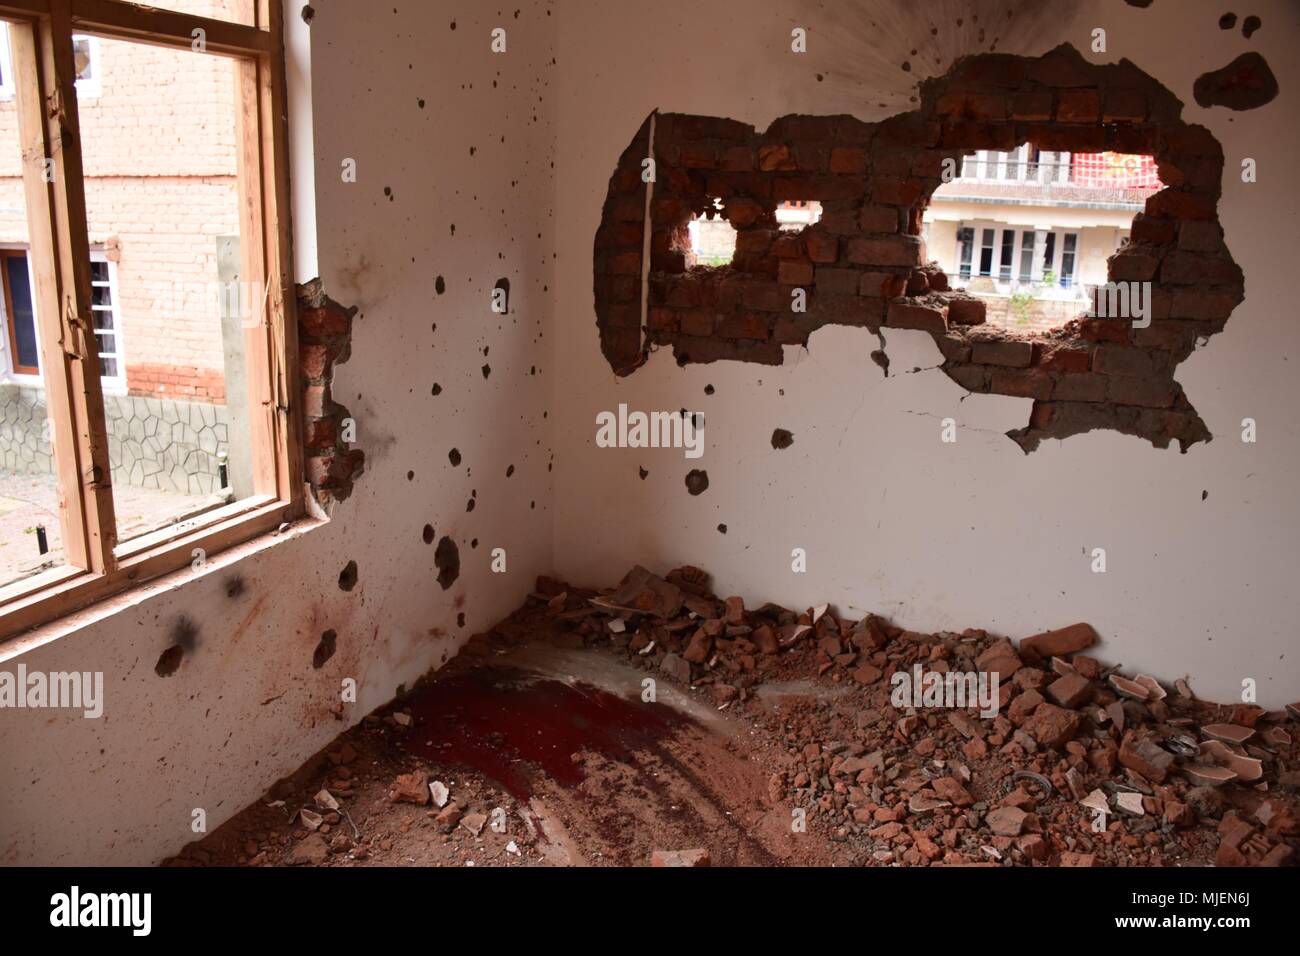 May 5, 2018 - Srinagar, Jammu & Kashmir, India - Damaged parts of Encounter site in Srinagar.4 Killed and several injured in an encounter between Indian forces and militants at chatabal area of Srinagar summer capital of Indian Kashmir on Saturday. Three militants were killed during a brief shootout after government forces laid seige around densely populated chatabal area of Srinagar. A young man also died after he was hit by the armoured vehicle during the clashes between the residents and police force as residents tried to help the Militants in escape. (Credit Image: © Abbas Idrees/SOPA Ima Stock Photo